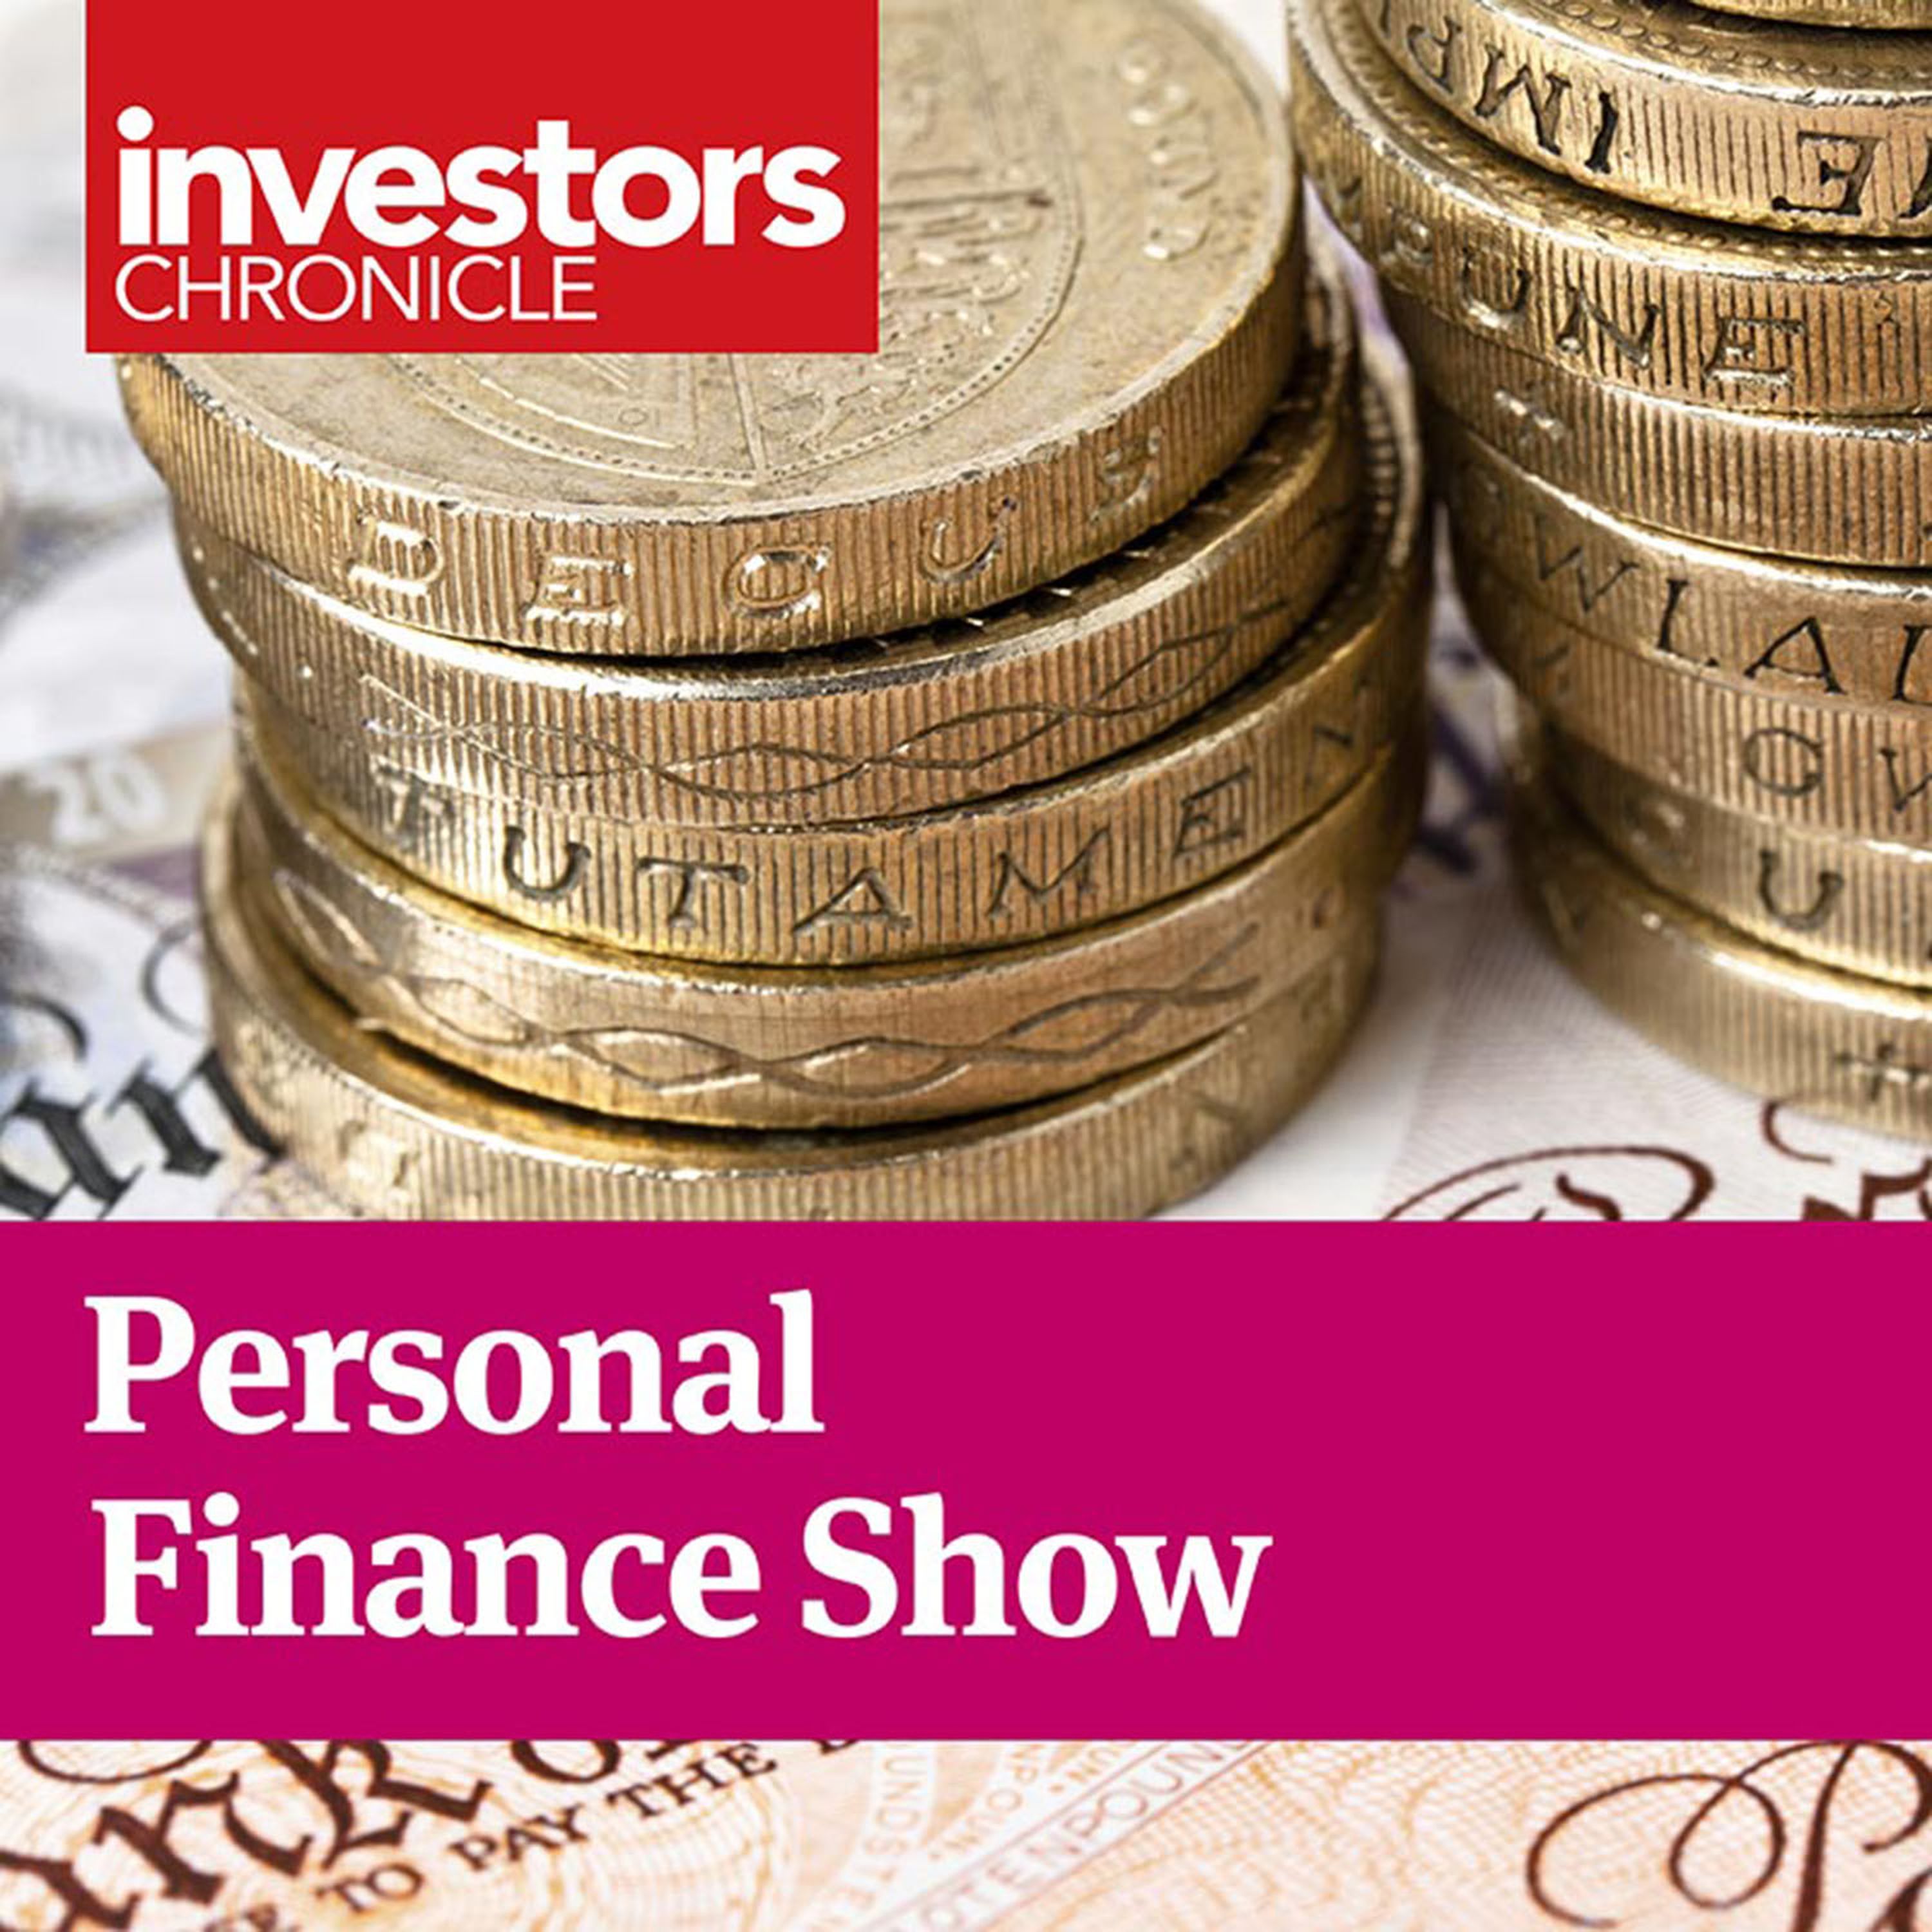 Personal Finance Show: Investment trust special